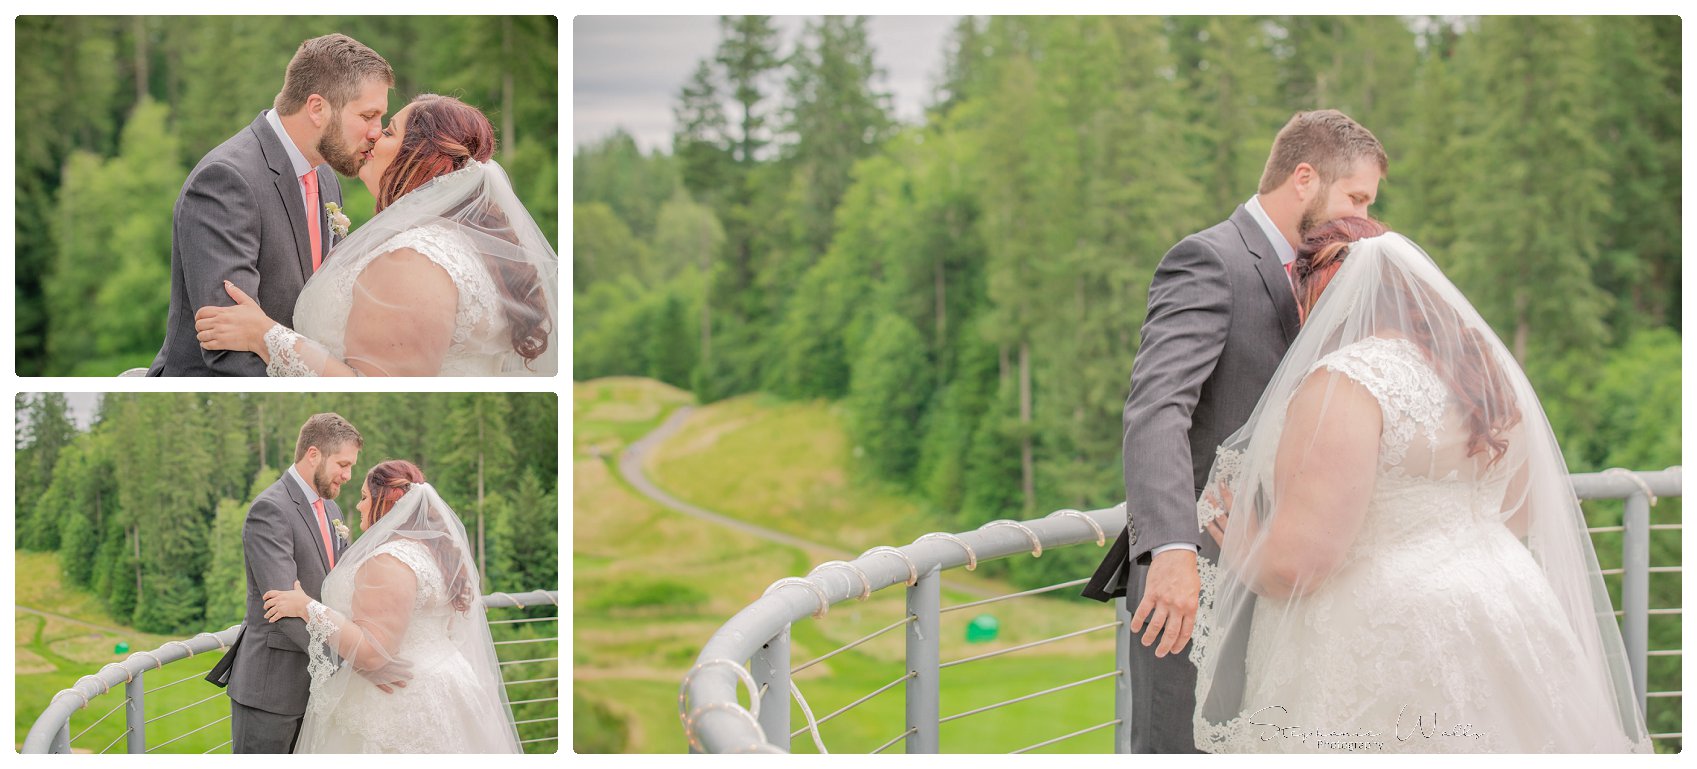 1st look Bridals 030 Gold Mountain Golf Course Wedding With Jenn and Rob